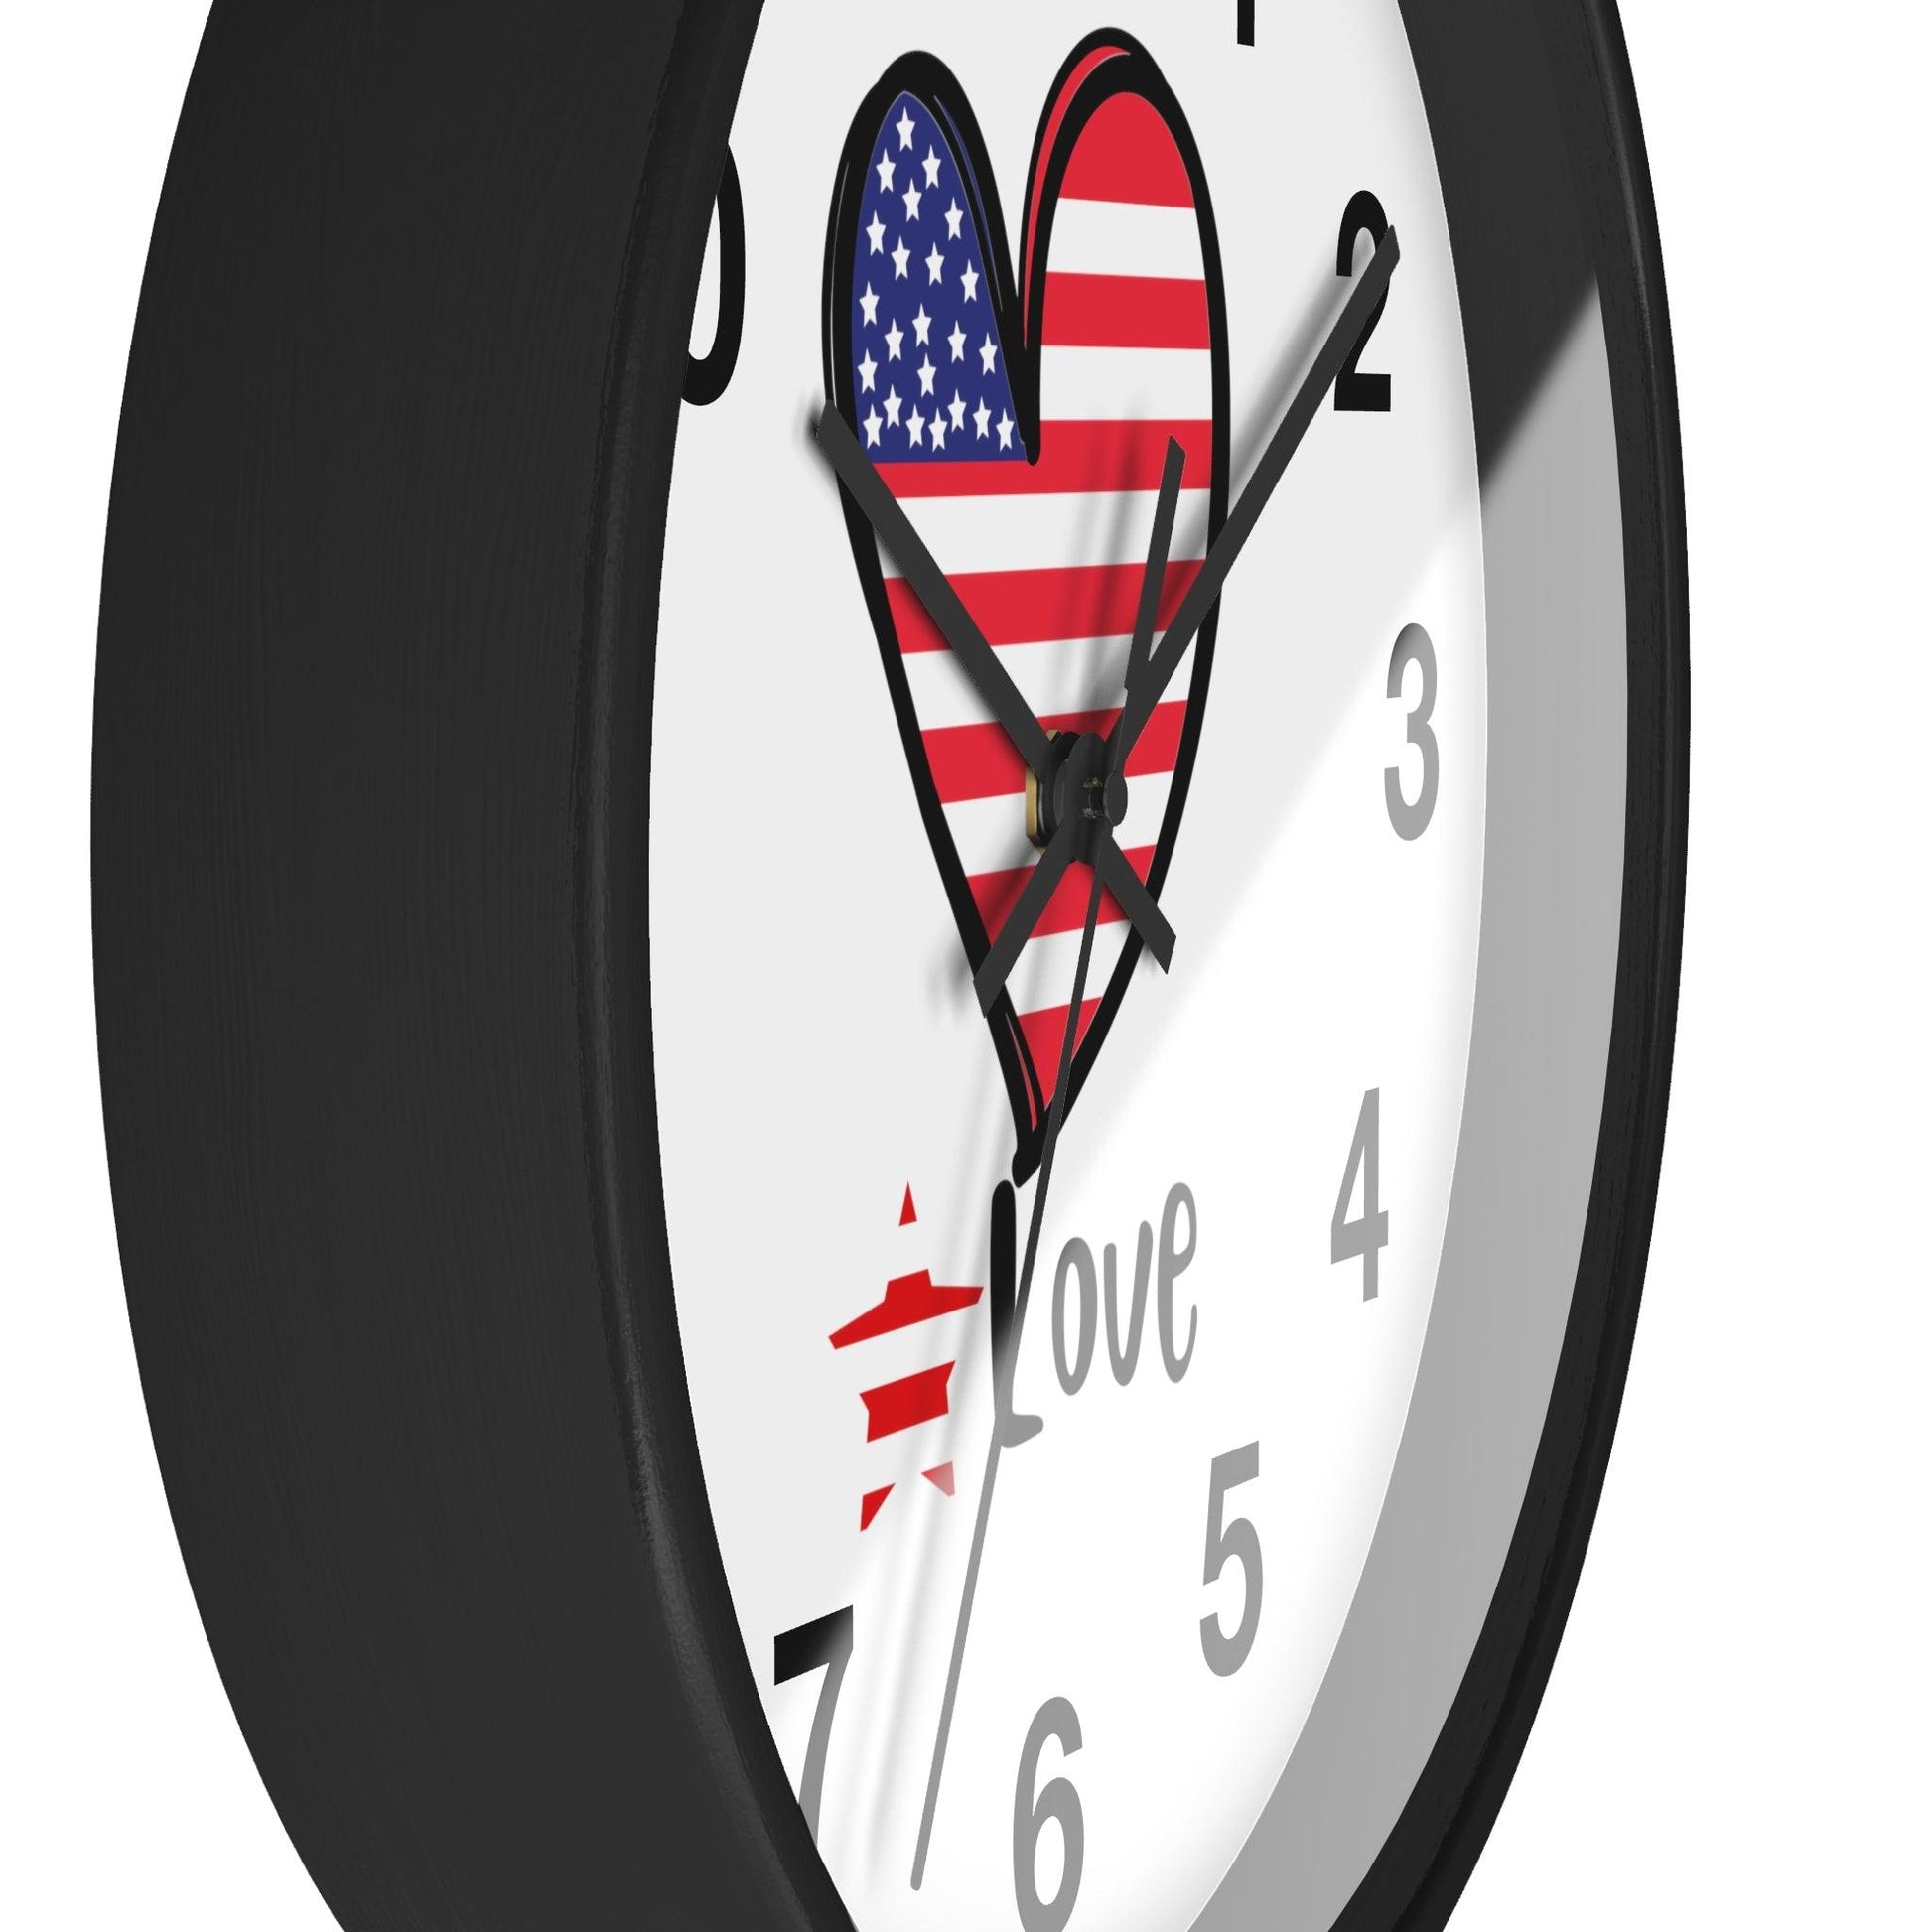 USA Flag Wall Clock, Home Decor gift, House Warming Gift, New Home Gift, Patriotic Gift for Americans Office Clock School Clock Home Clock - Giftsmojo